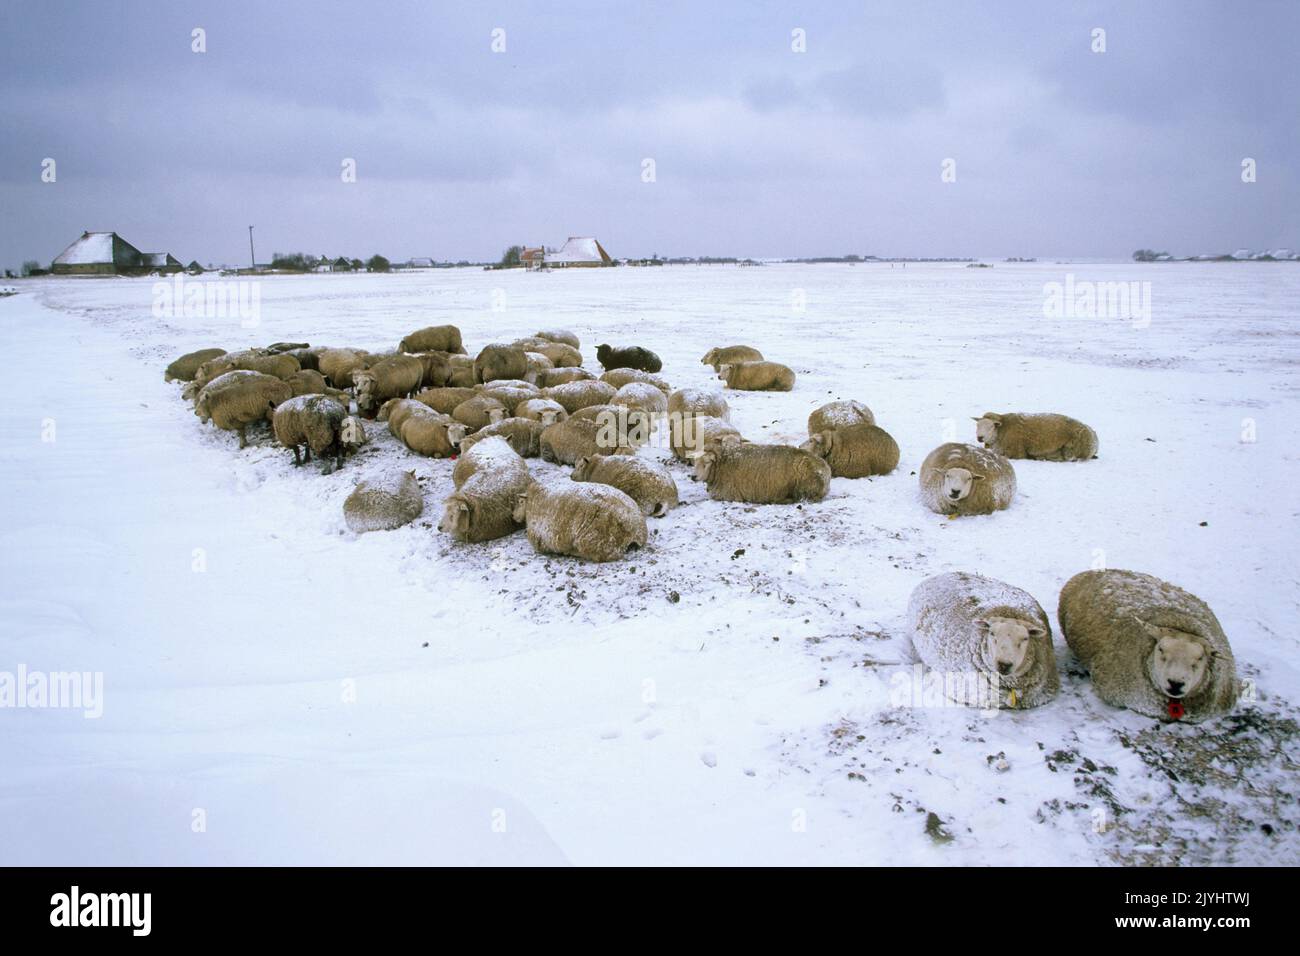 domestic sheep (Ovis ammon f. aries), herd on snowy pasture in winter, Netherlands Antilles, Frisia, Gaast Stock Photo